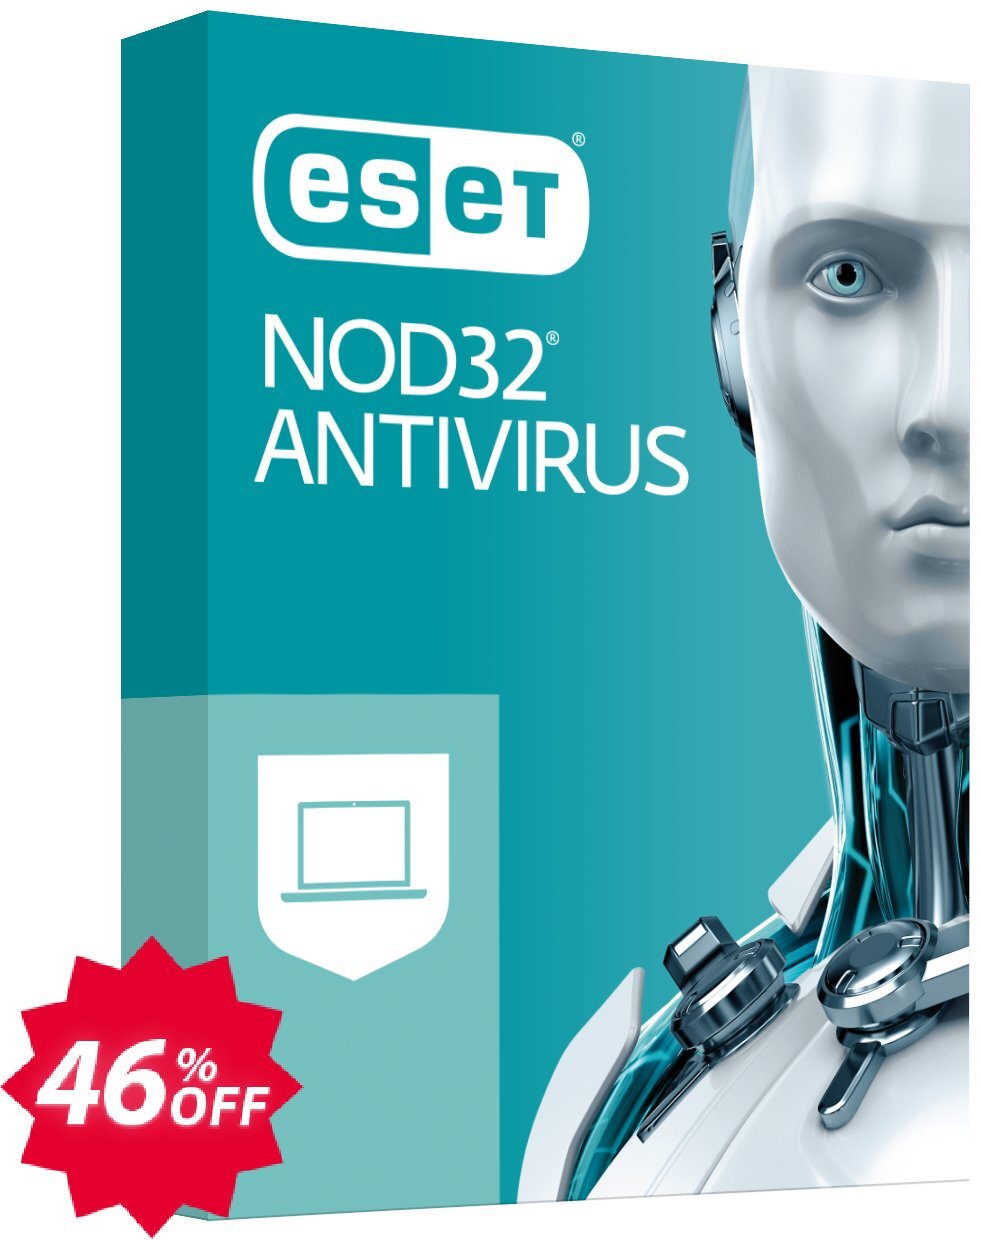 ESET NOD32 Antivirus -  Yearly 3 Devices Coupon code 46% discount 